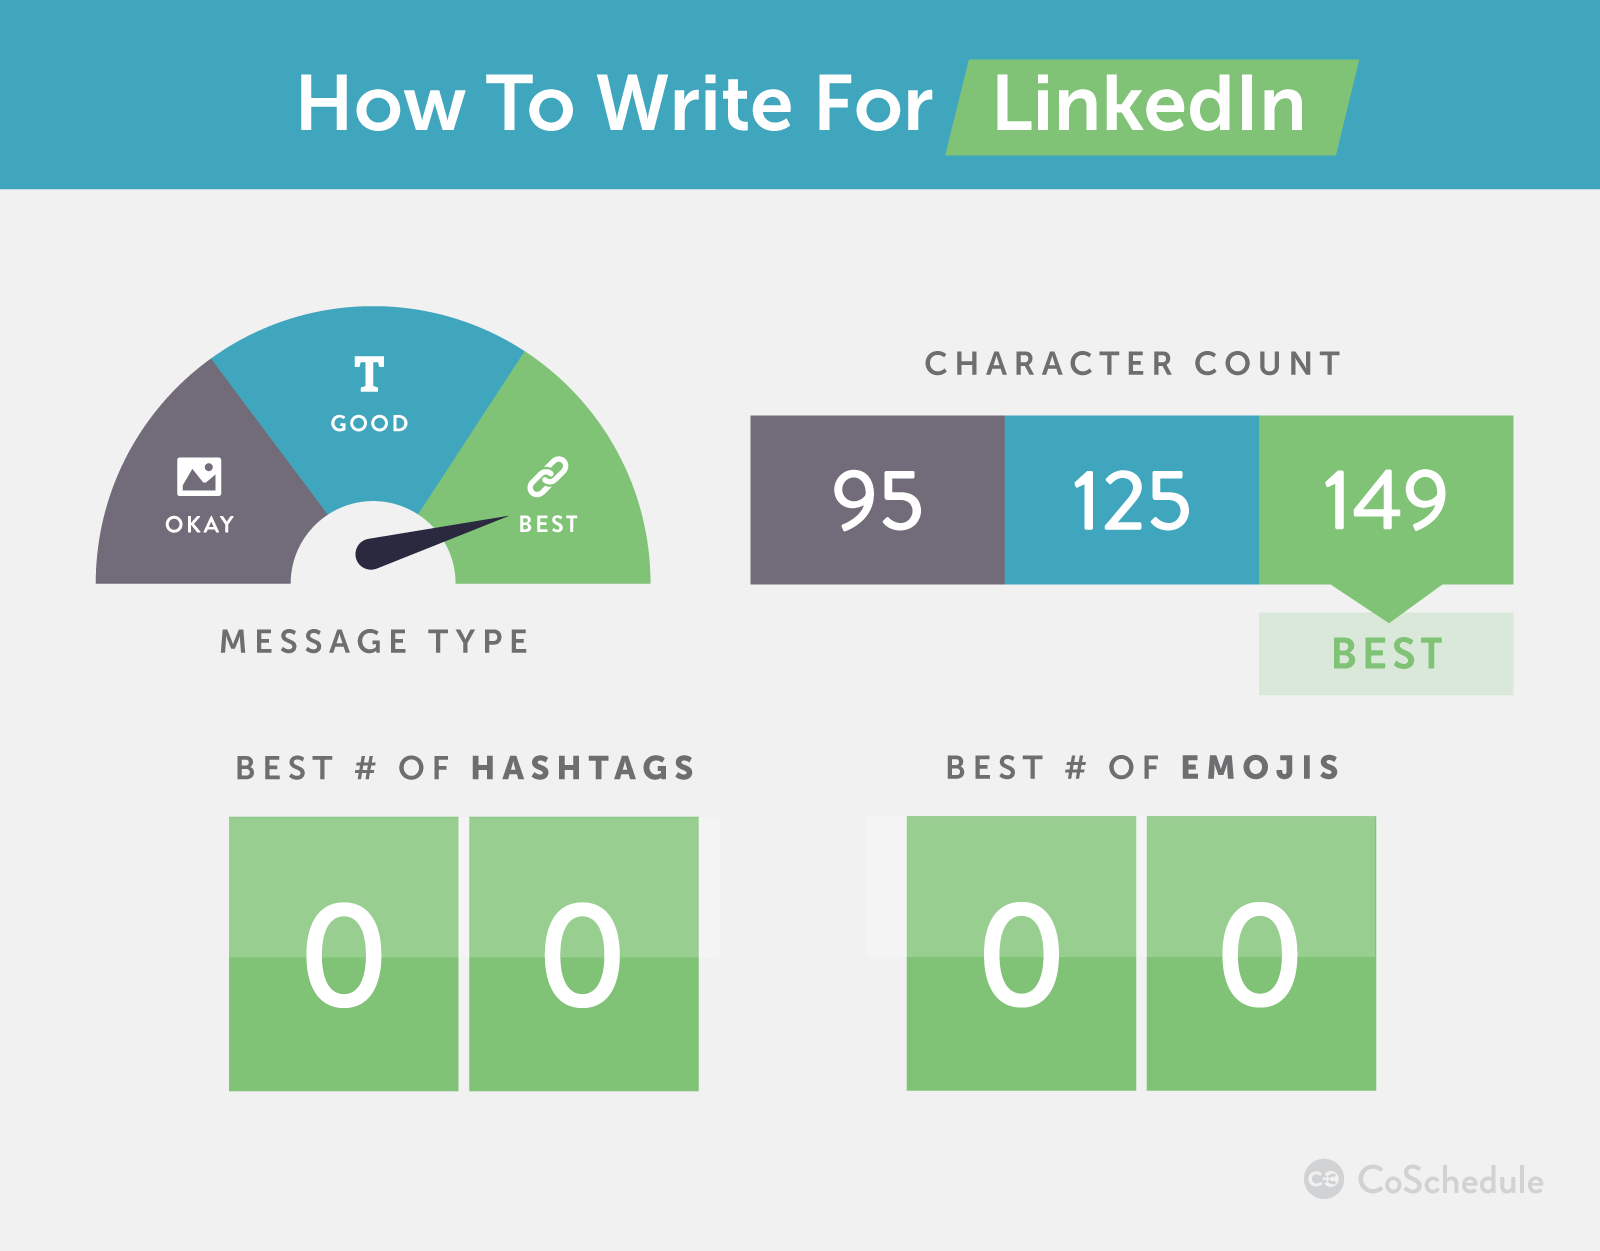 How to write for LinkedIn